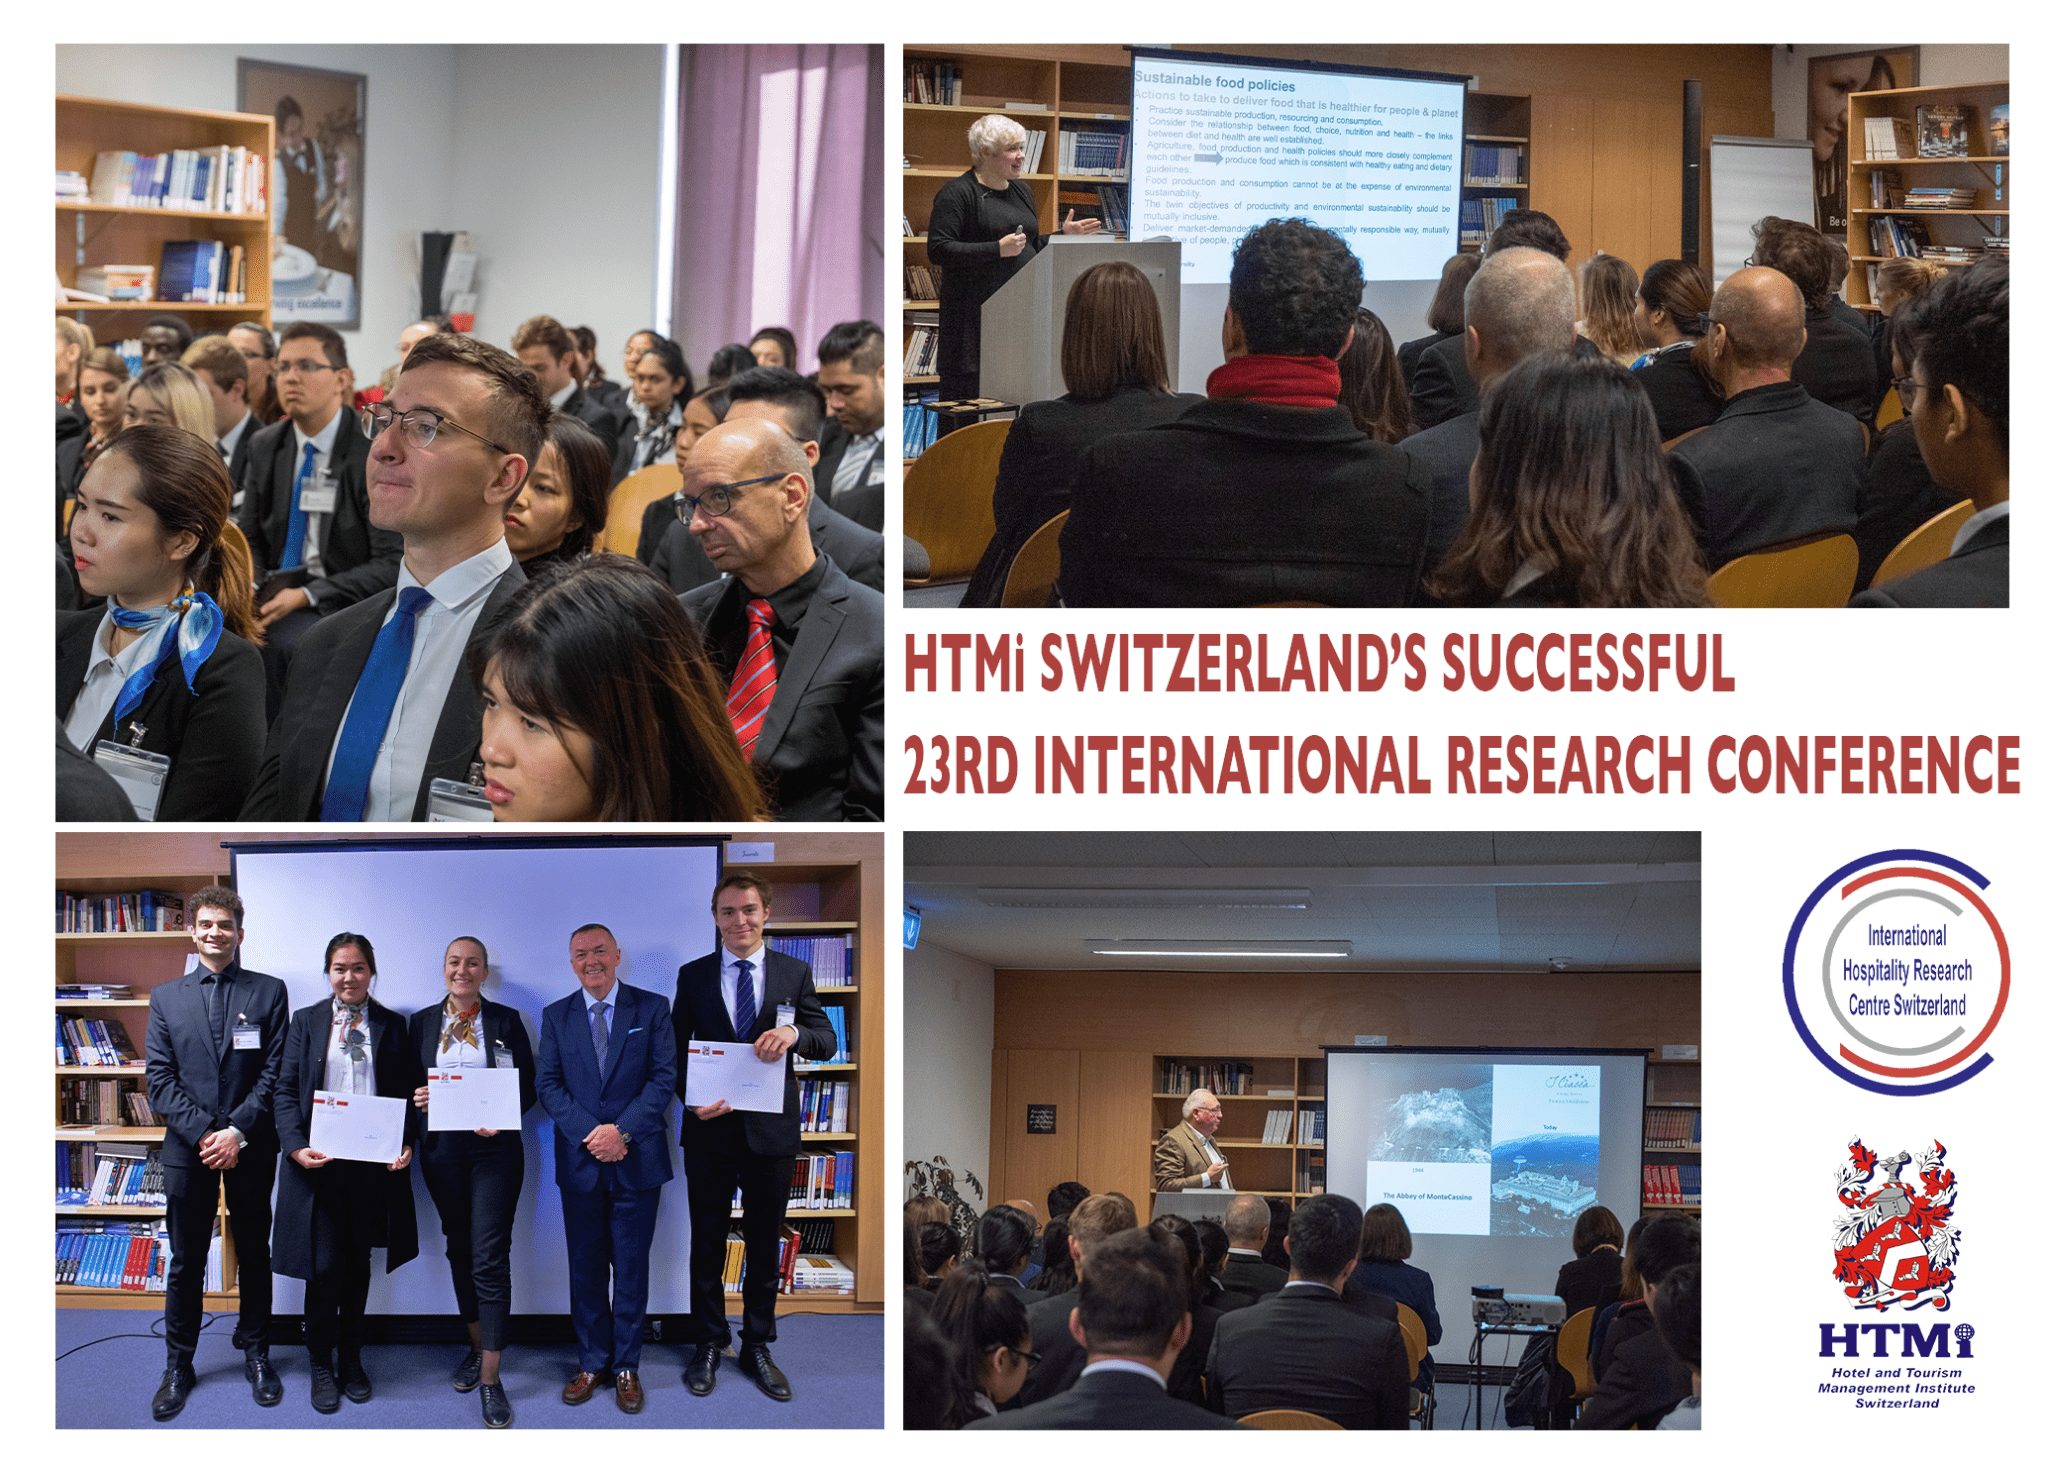 HTMi Switzerland’s Successful 23rd International Research Conference